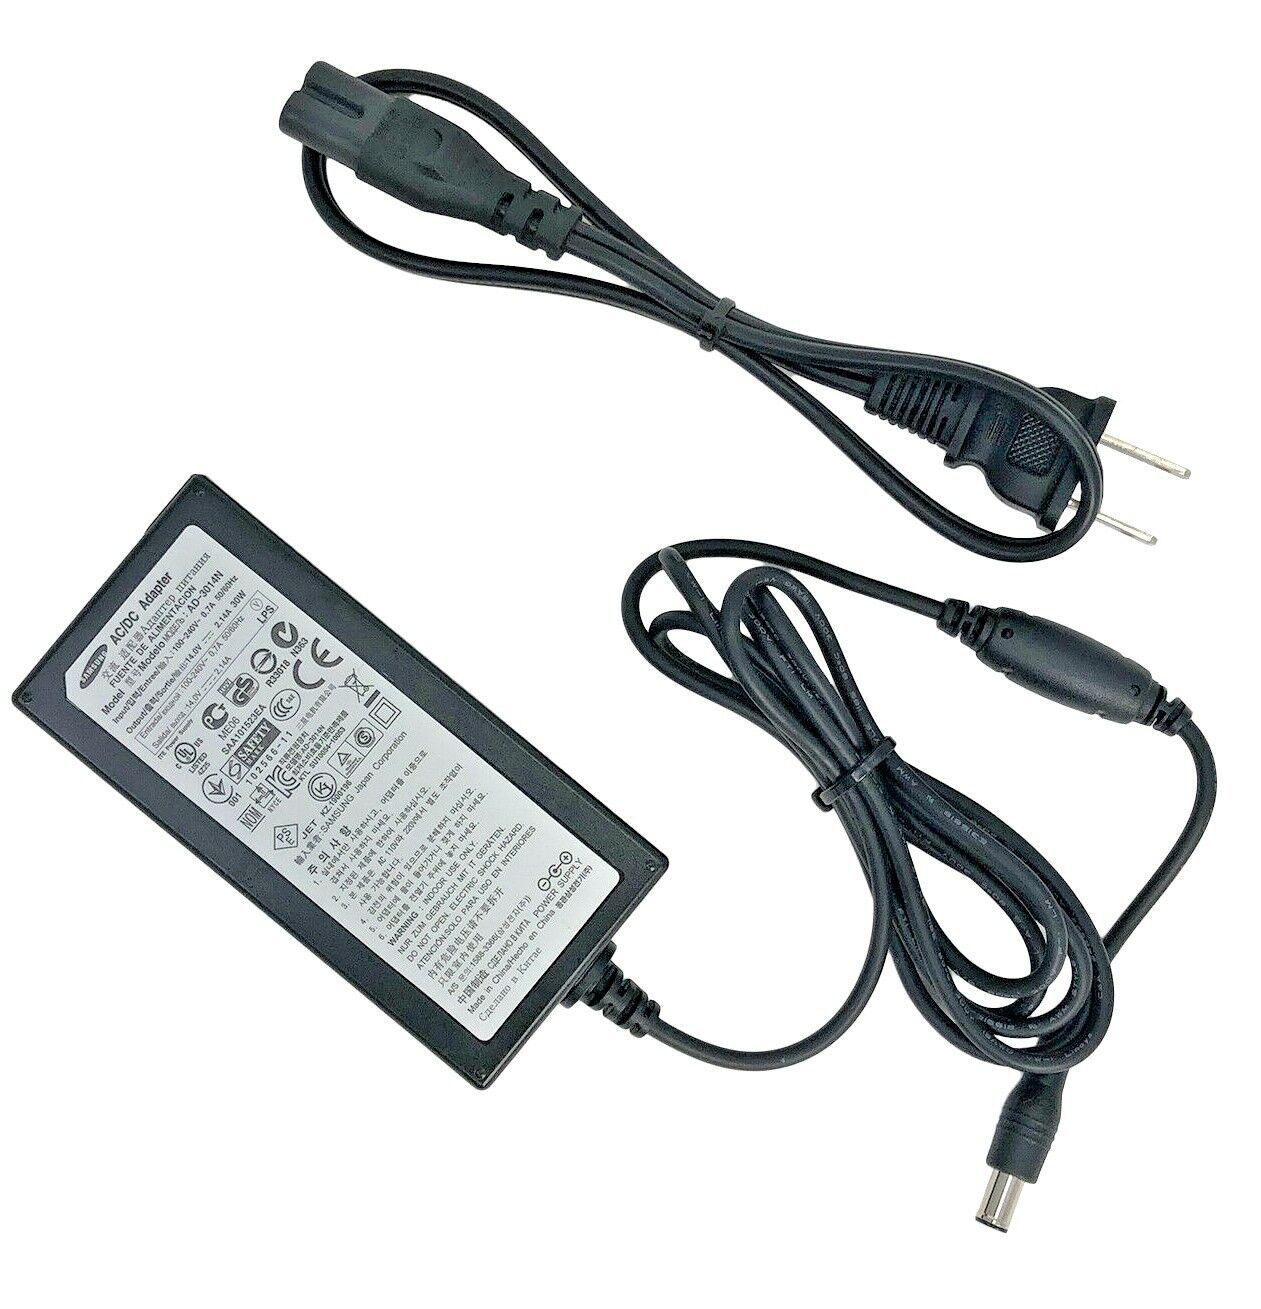 Original AC Adapter PS30W-14J1 30W 14V Power Supply Cord for Samsung Monitor OEM